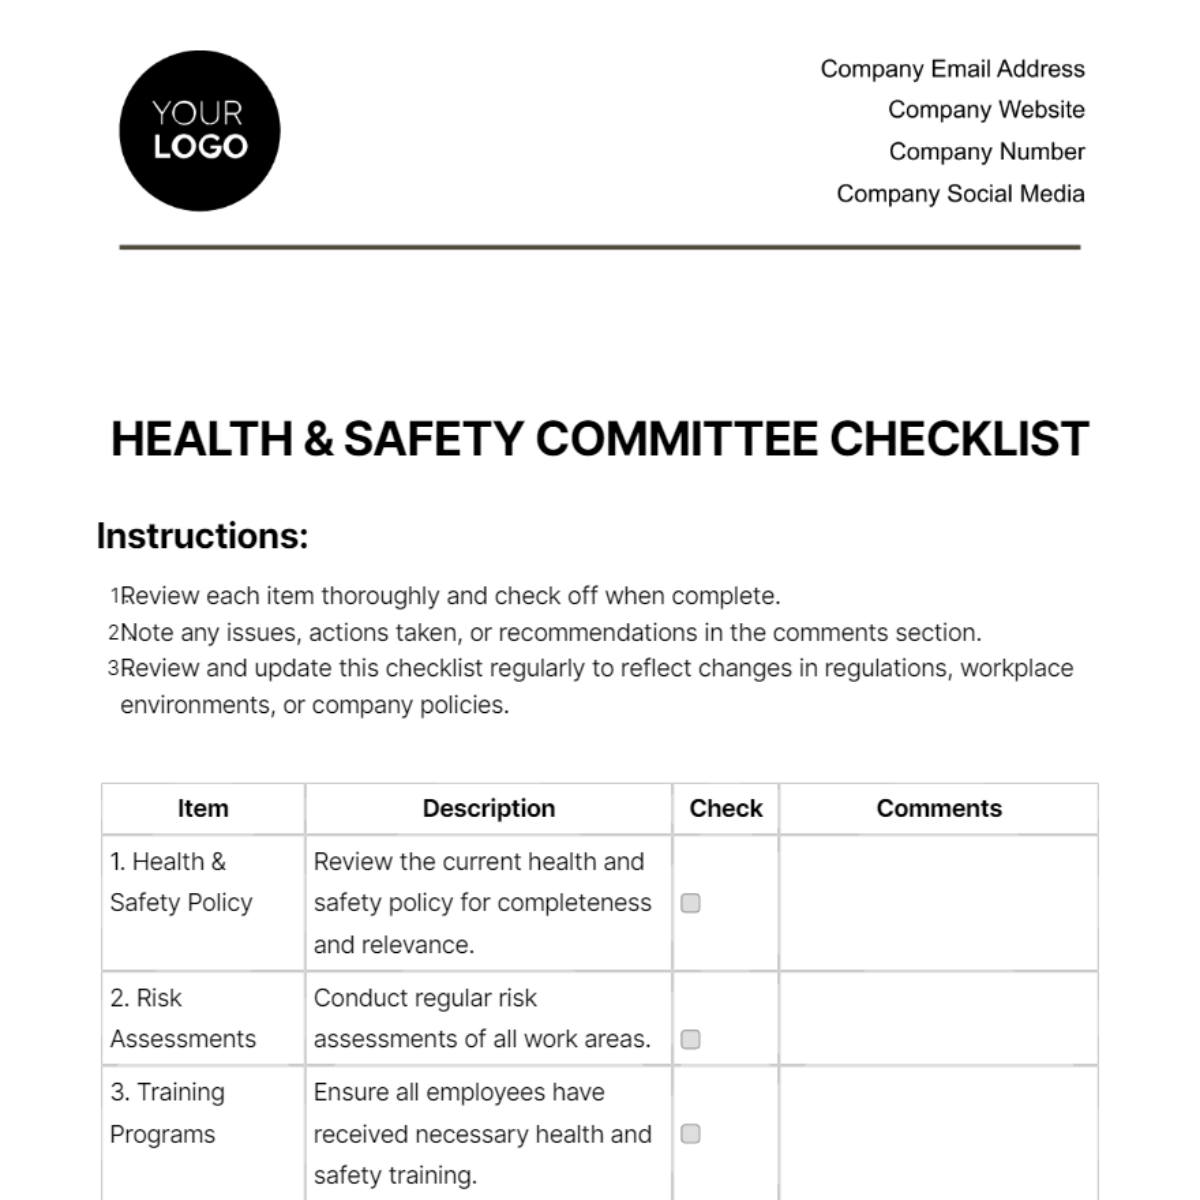 Health & Safety Committee Checklist Template